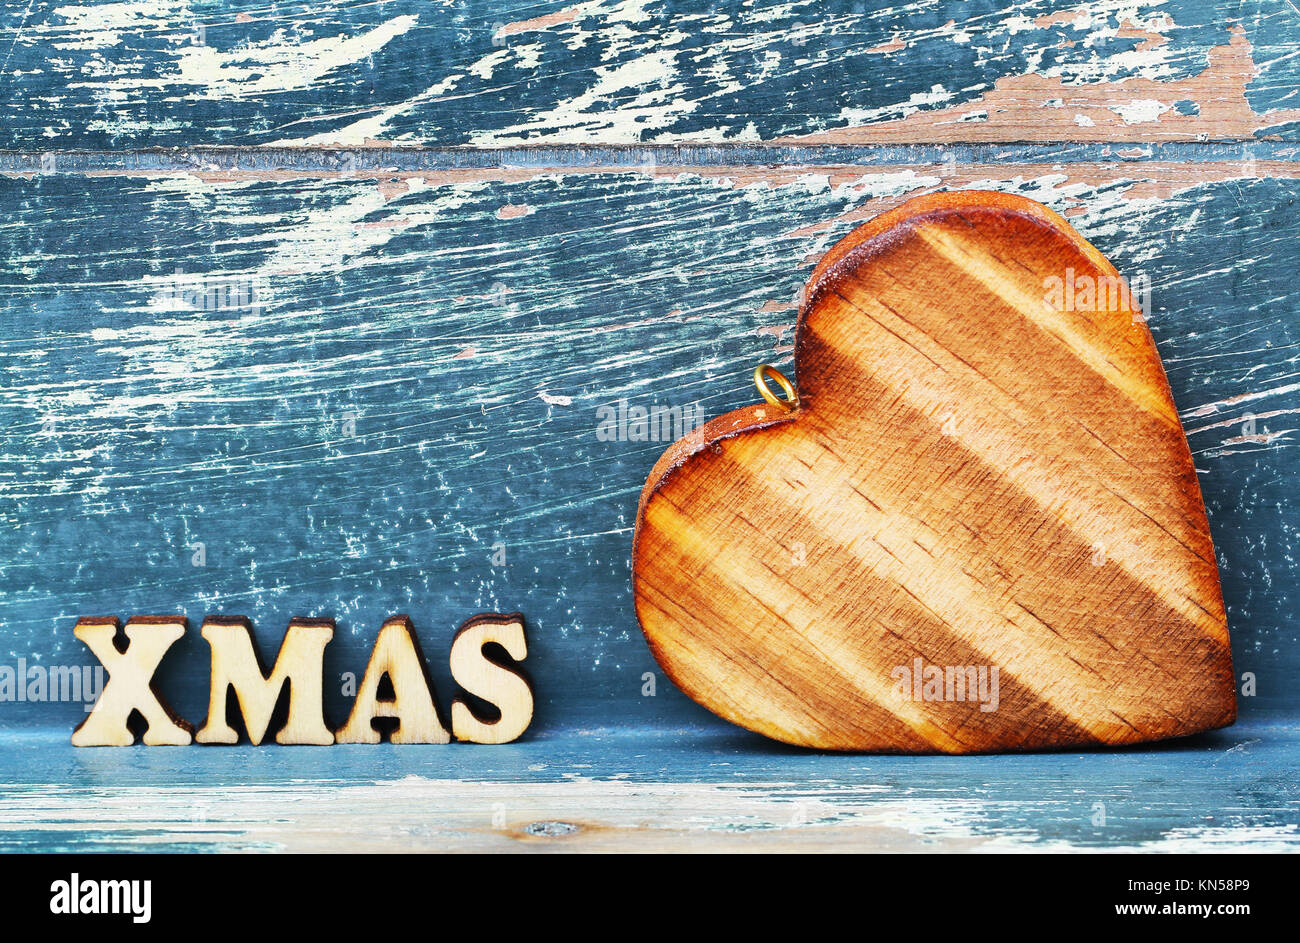 Xmas written with wooden letters and wooden heart on rustic surface Stock Photo